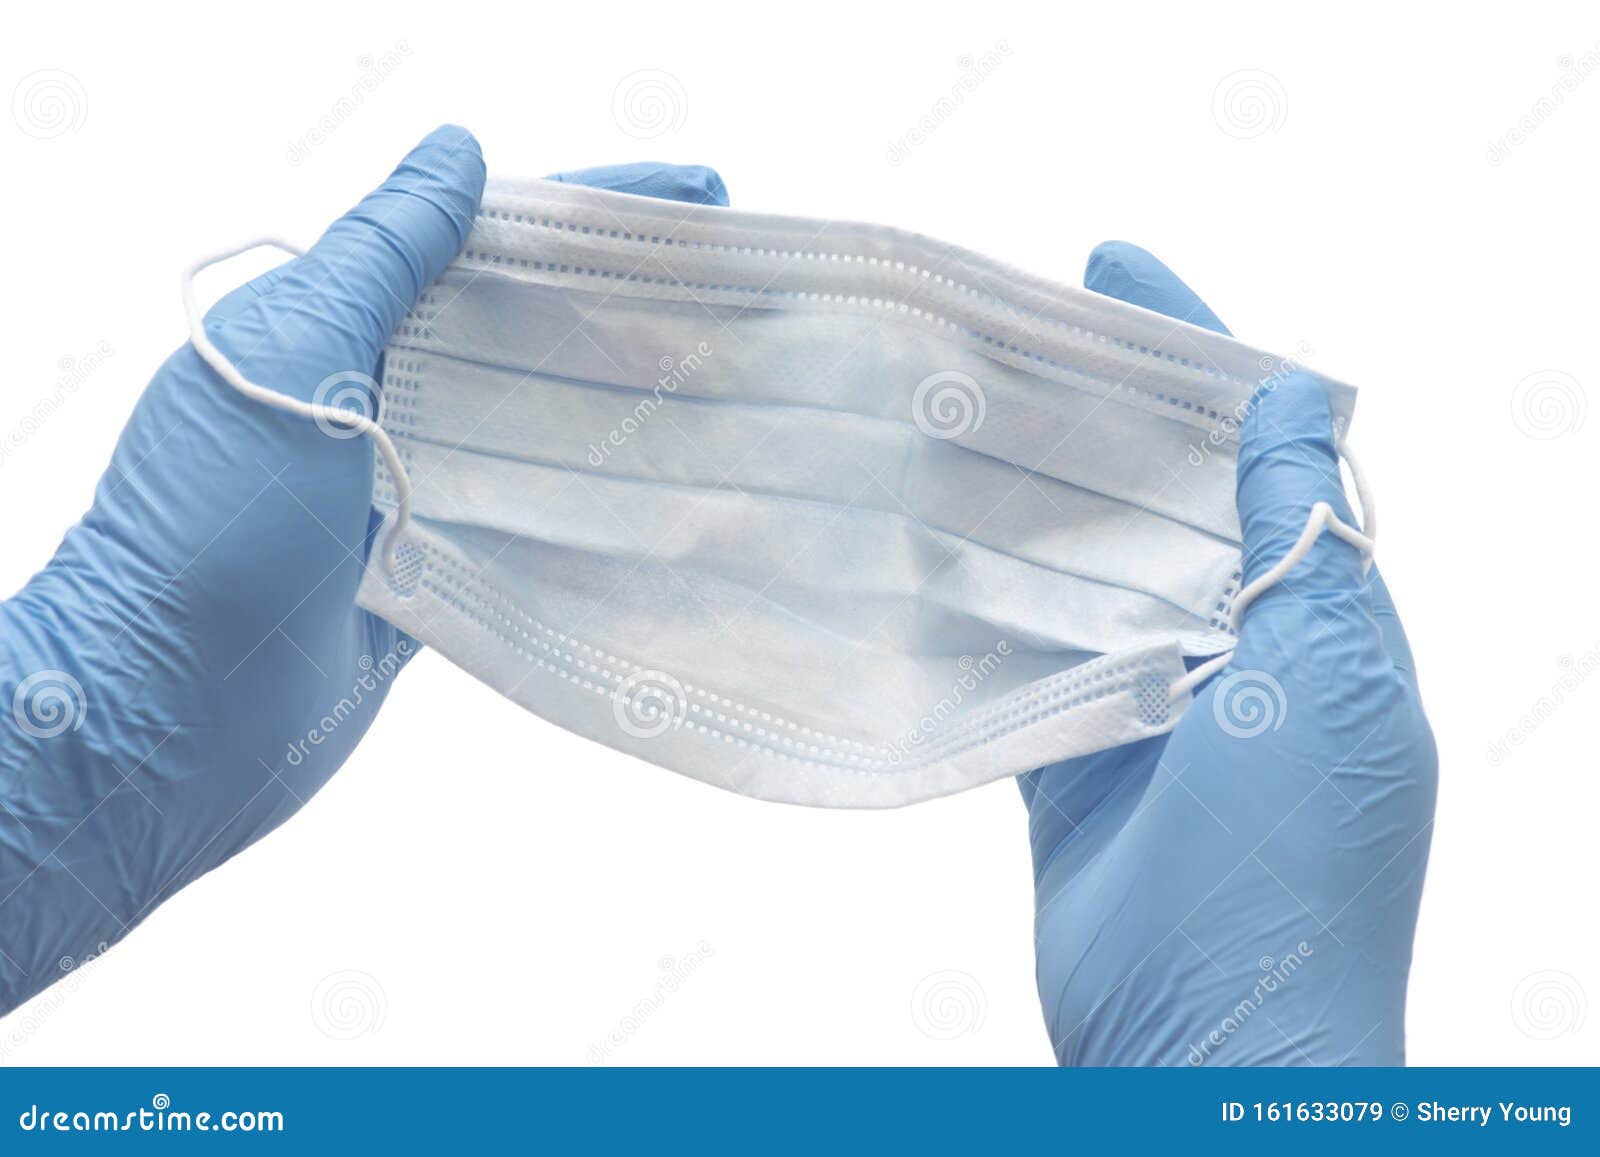 infection control mask